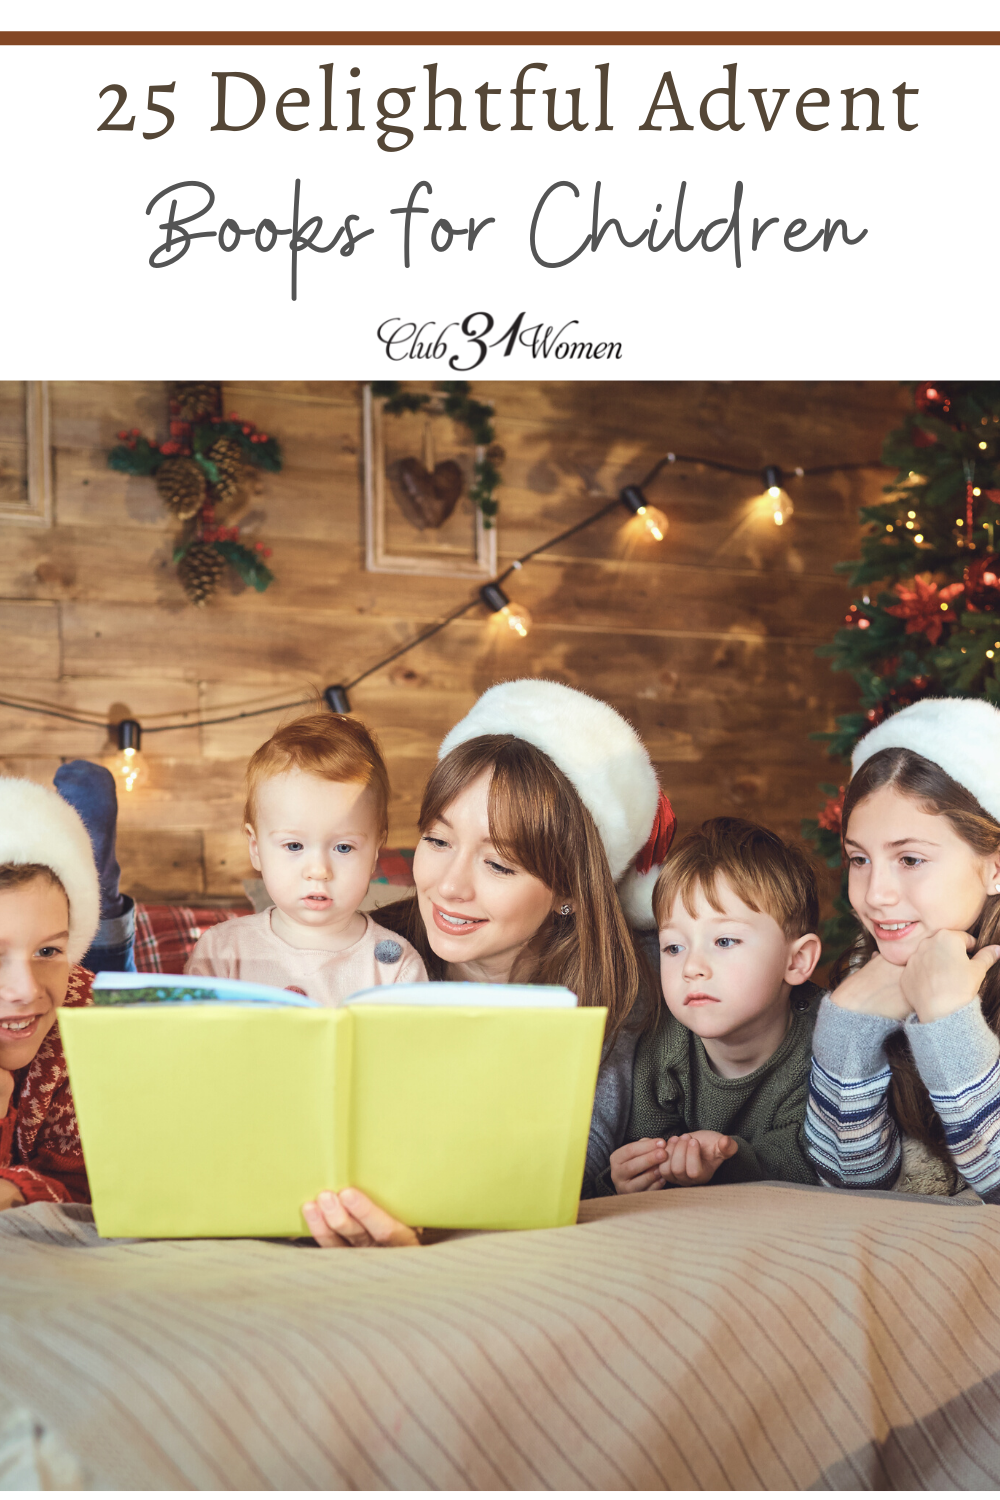 Enjoy some festive and wonderful ways to spark conversation about the real reason we celebrate Christmas through these delightful Christmas books! via @Club31Women